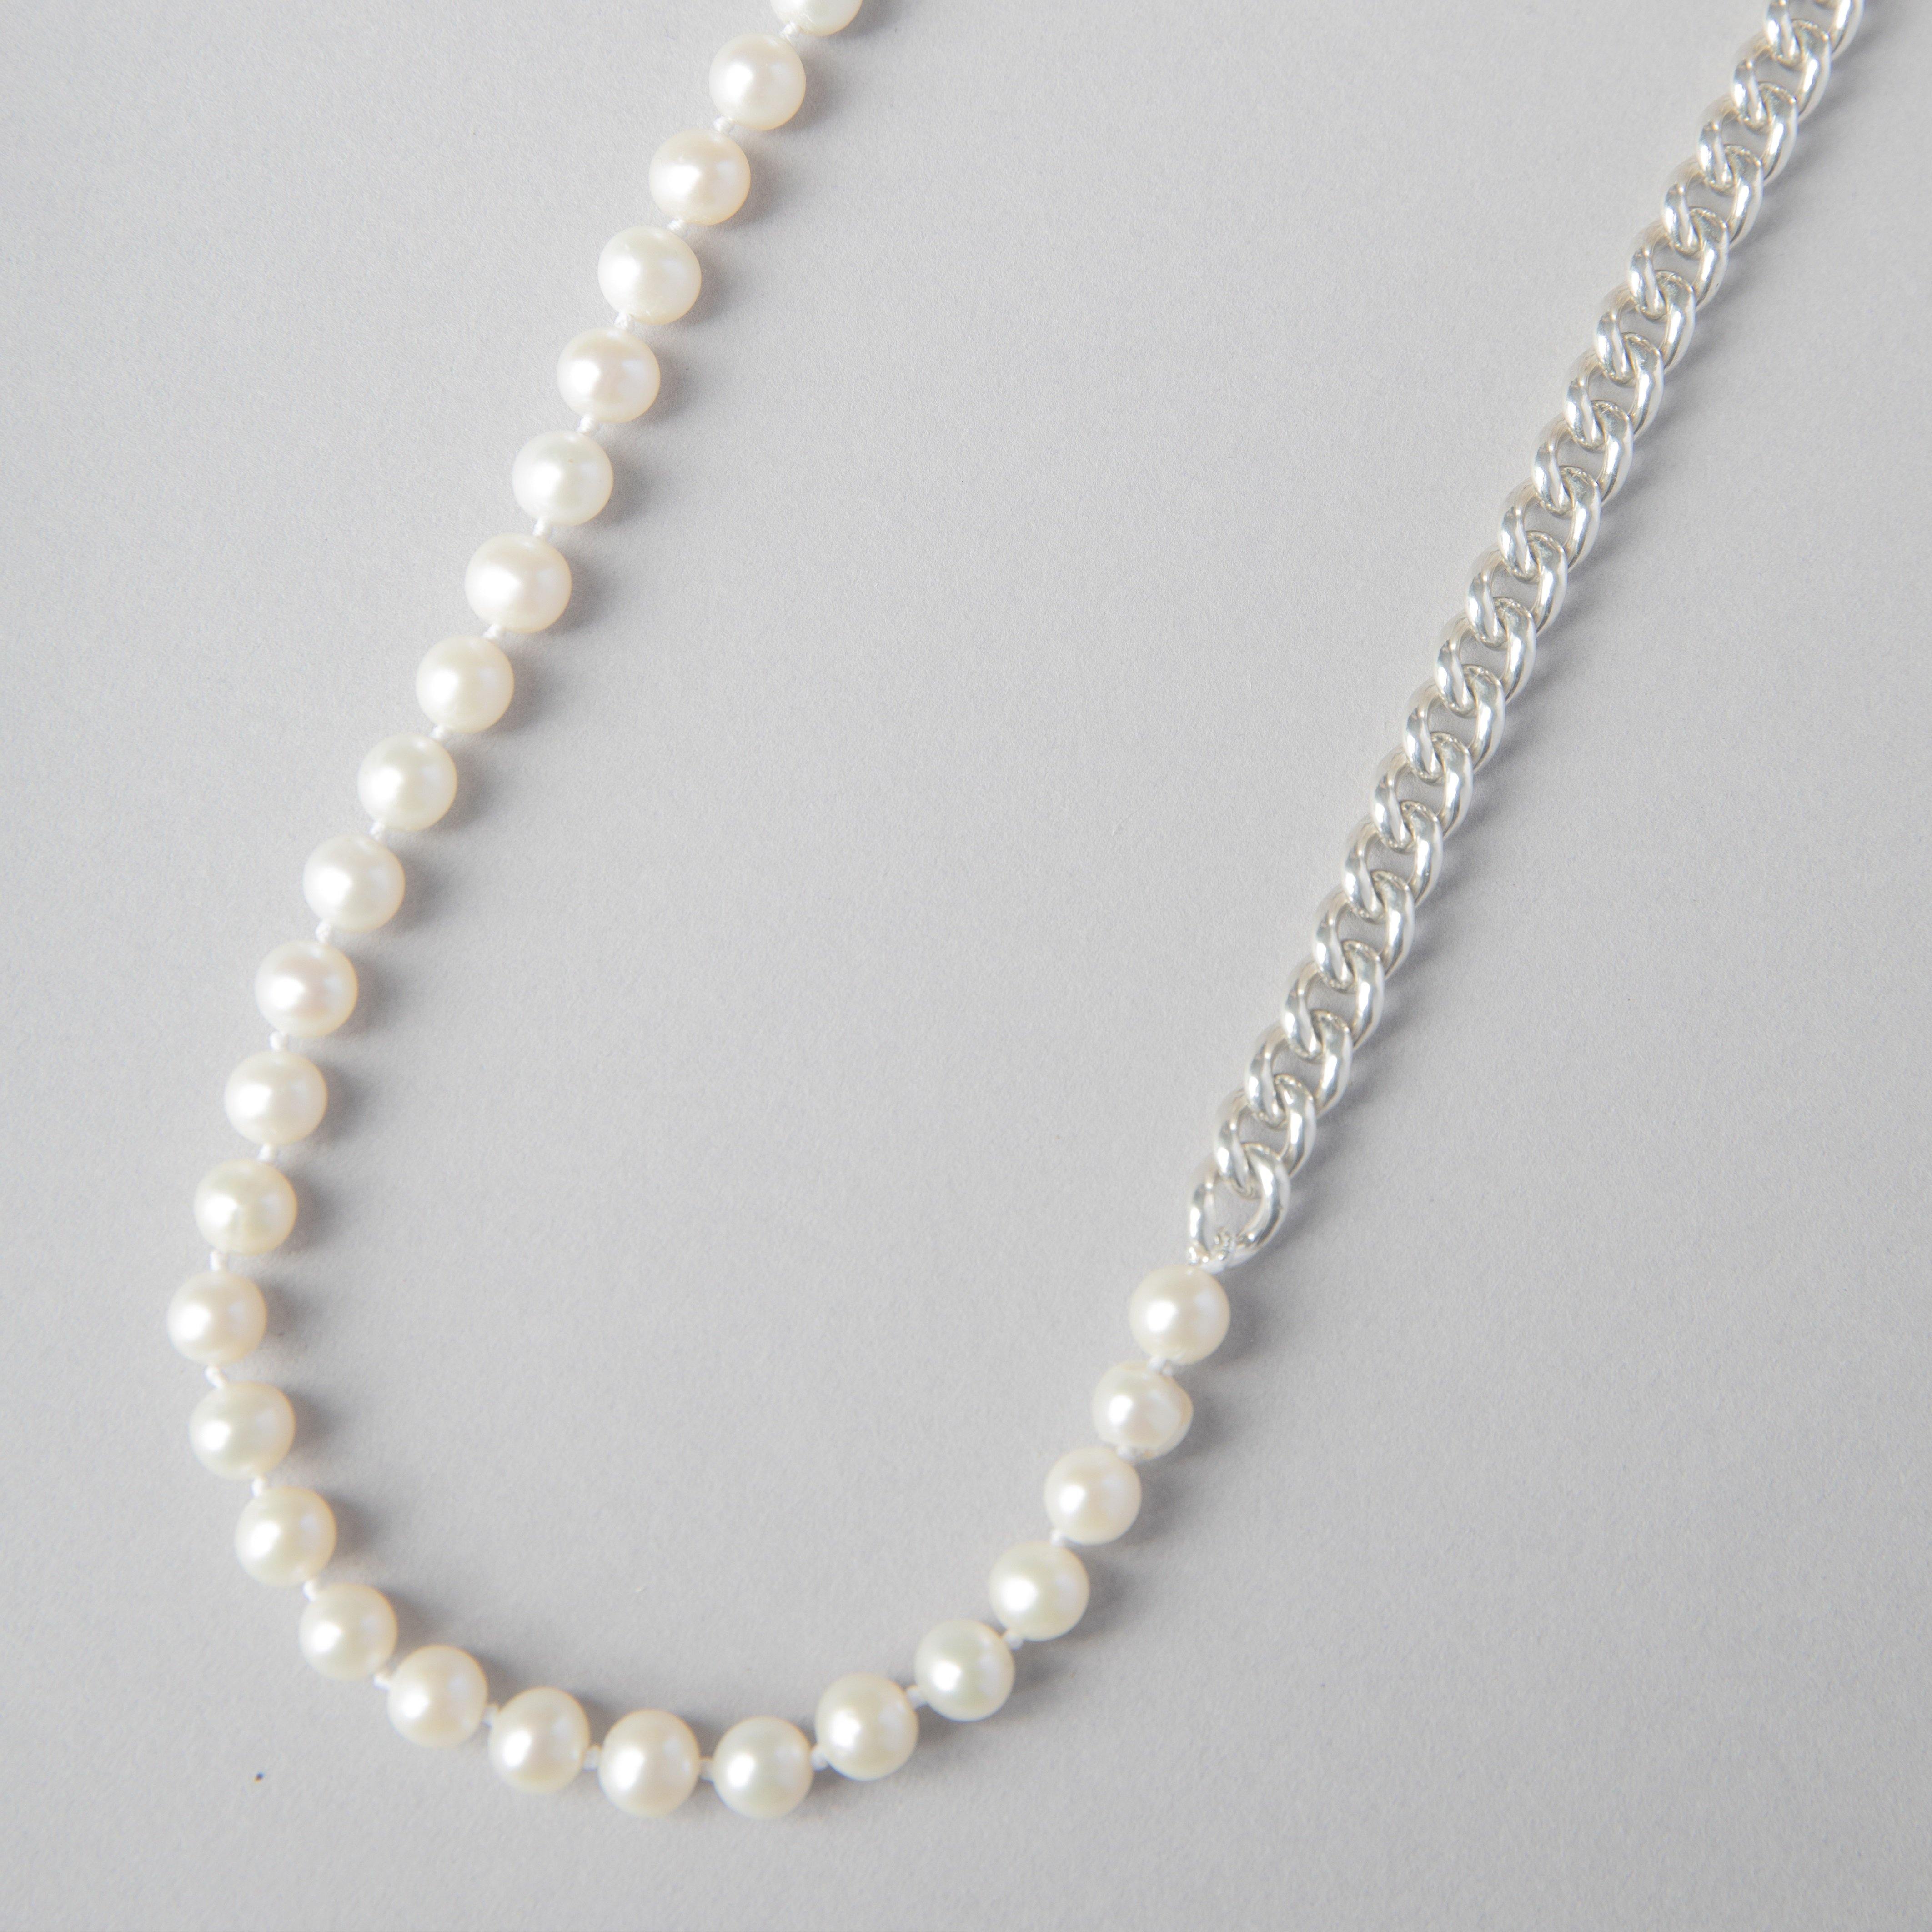 FRESHWATER PEARLS + STERLING SILVER CHAIN - bobbie carr